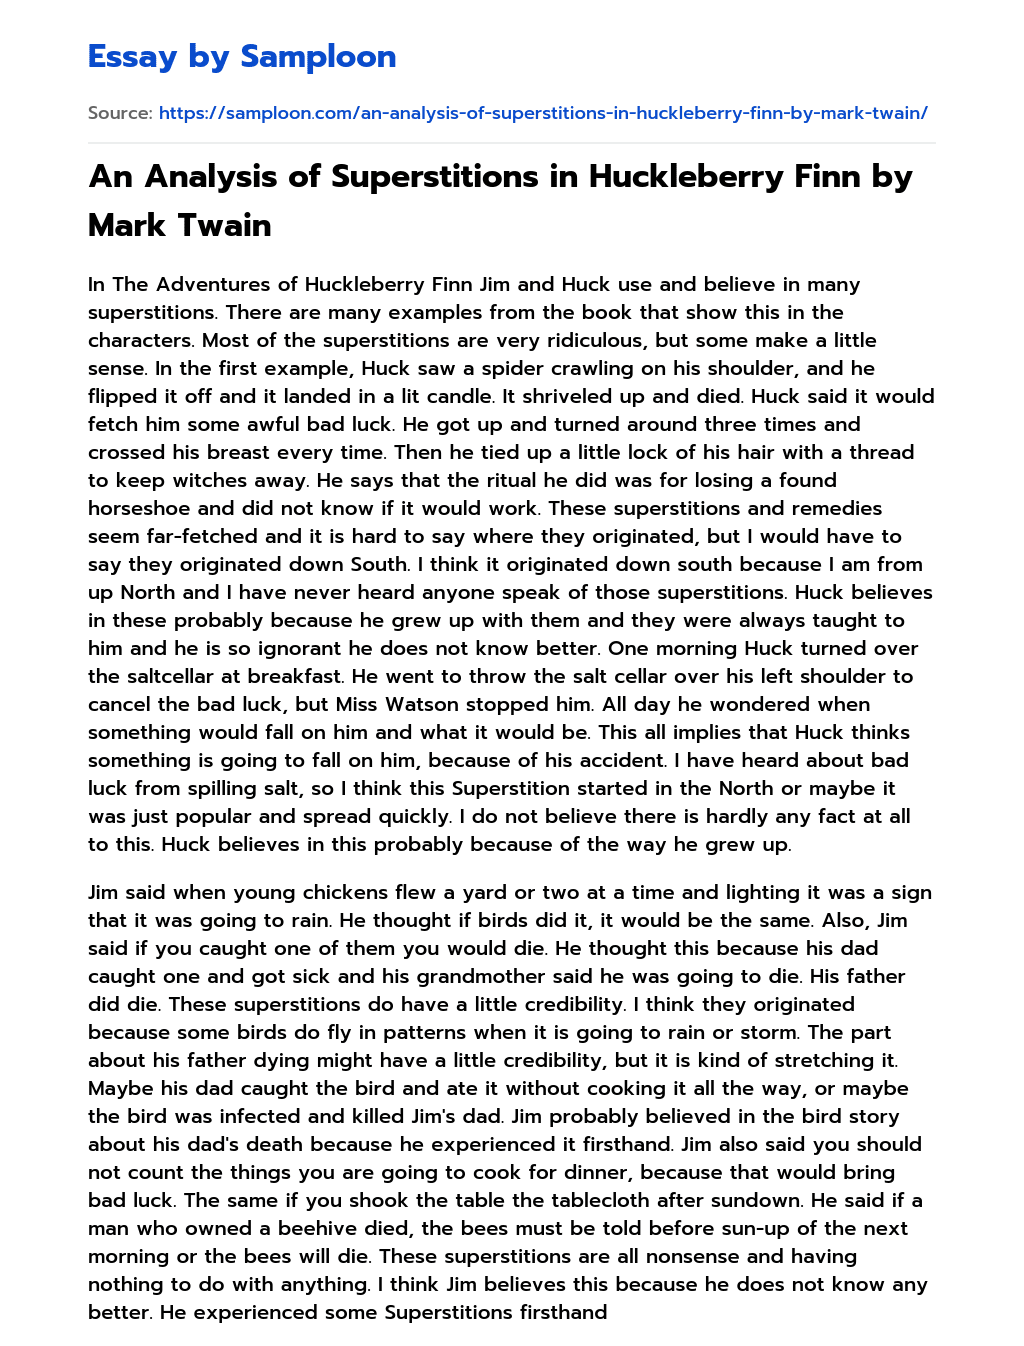 An Analysis of Superstitions in Huckleberry Finn by Mark Twain essay